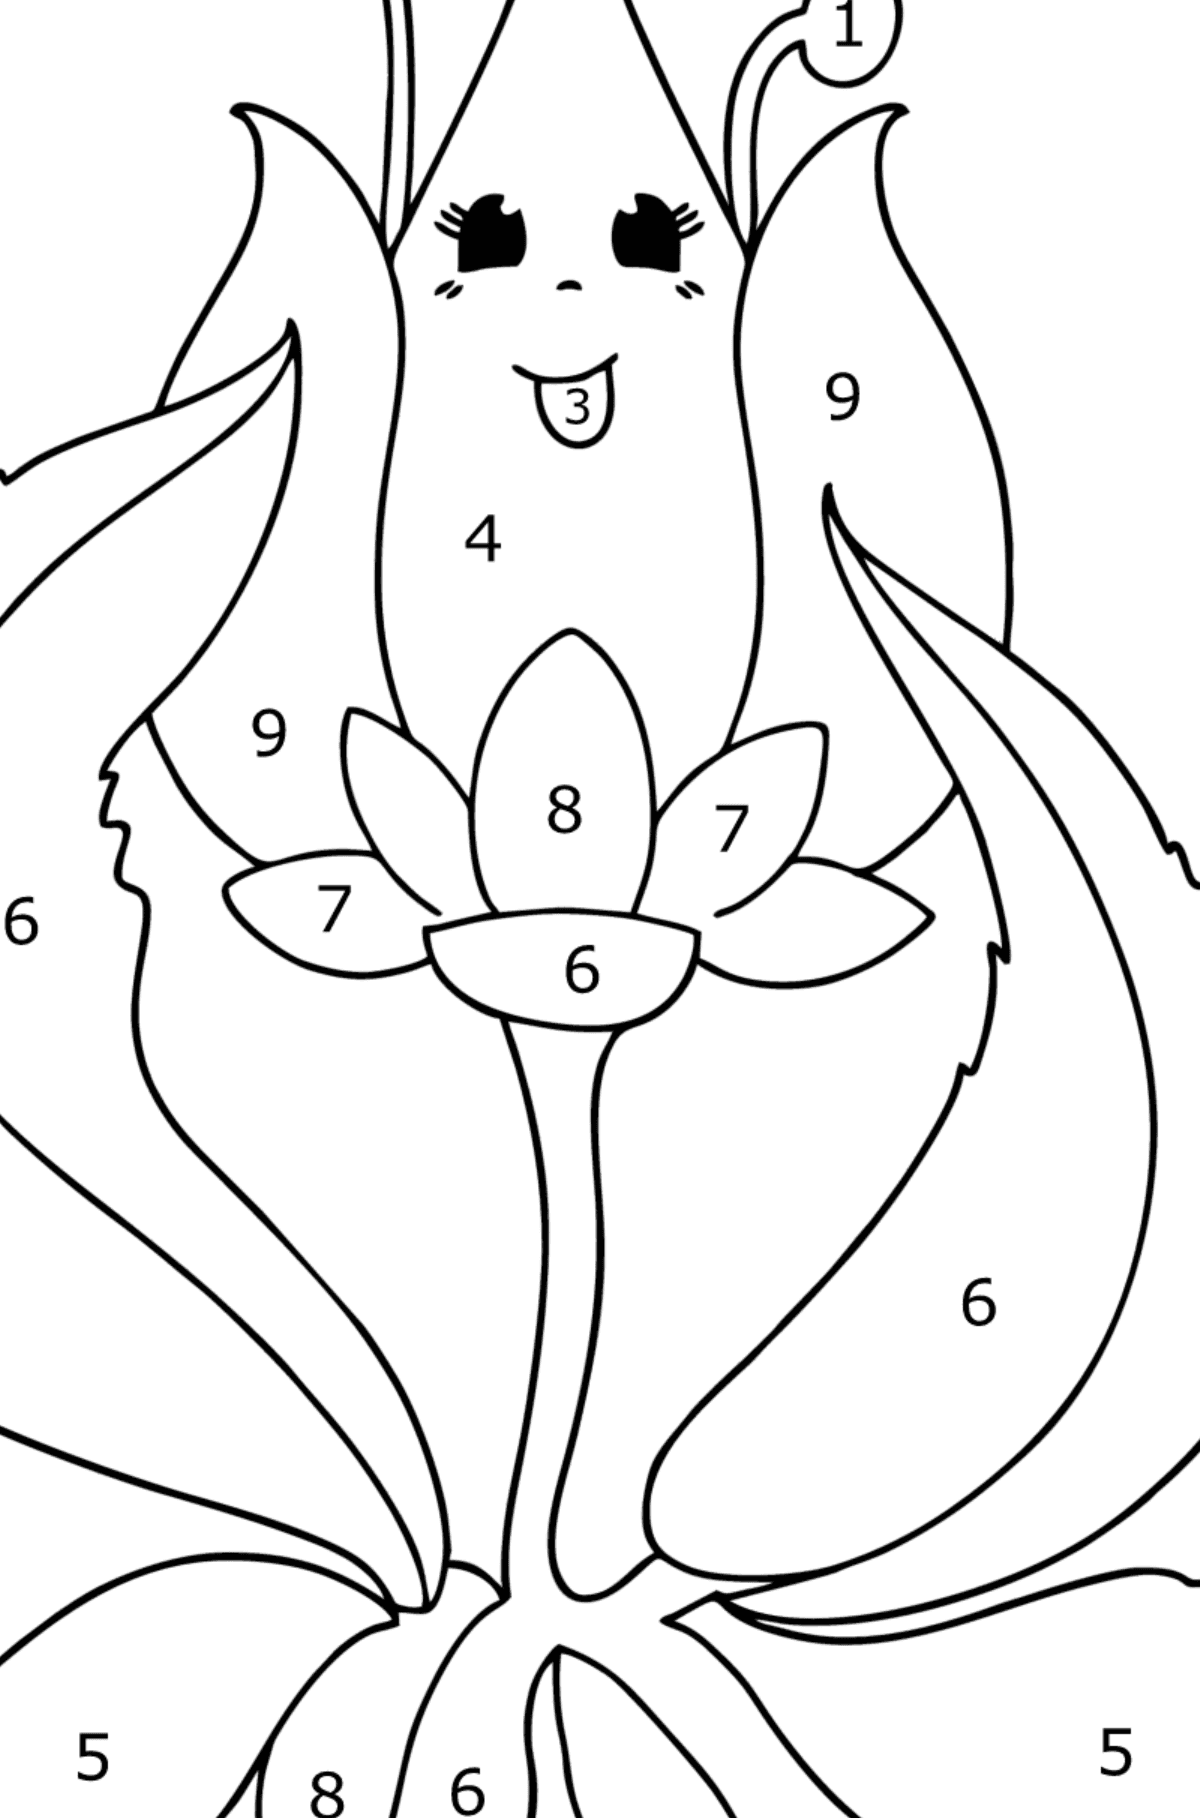 Bud with eyes coloring page - Coloring by Numbers for Kids